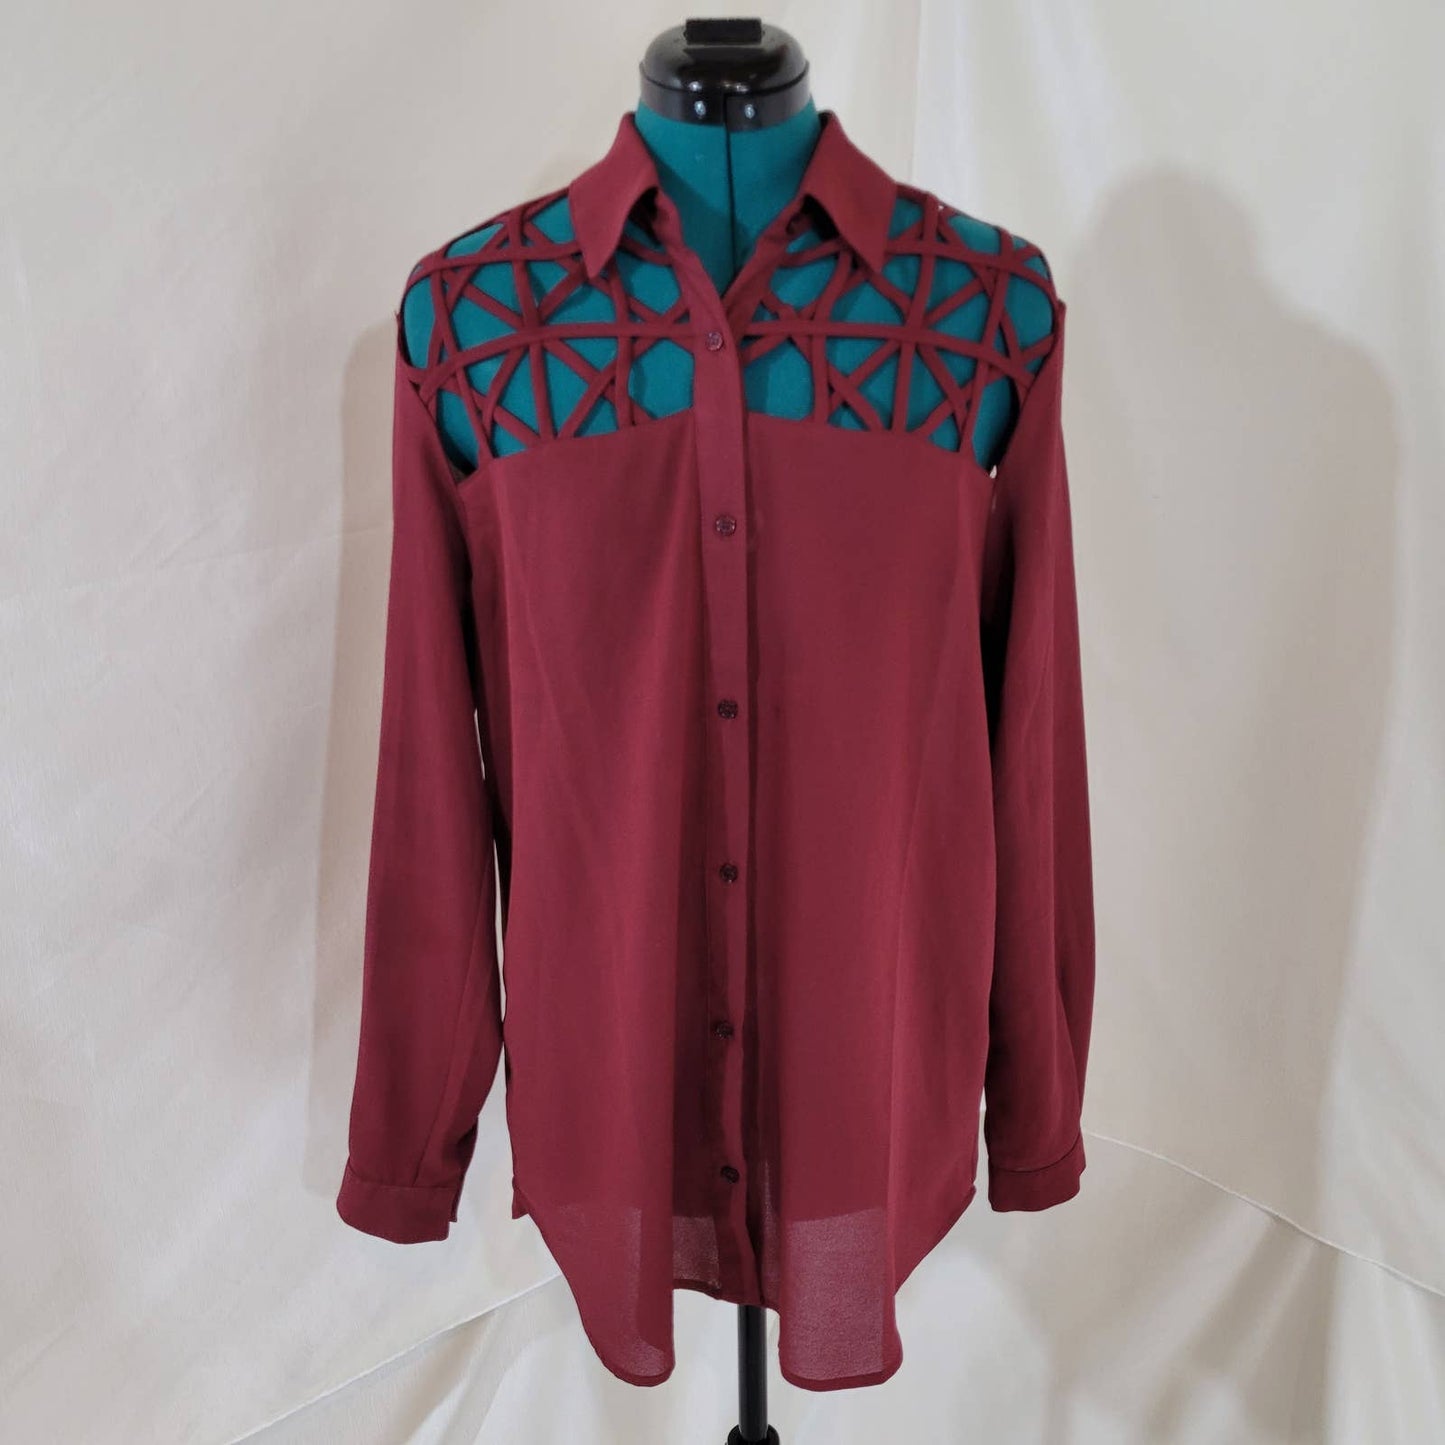 MINKPINK Burgundy Button Up Blouse with Cut Out Shoulders - Size Extra Small